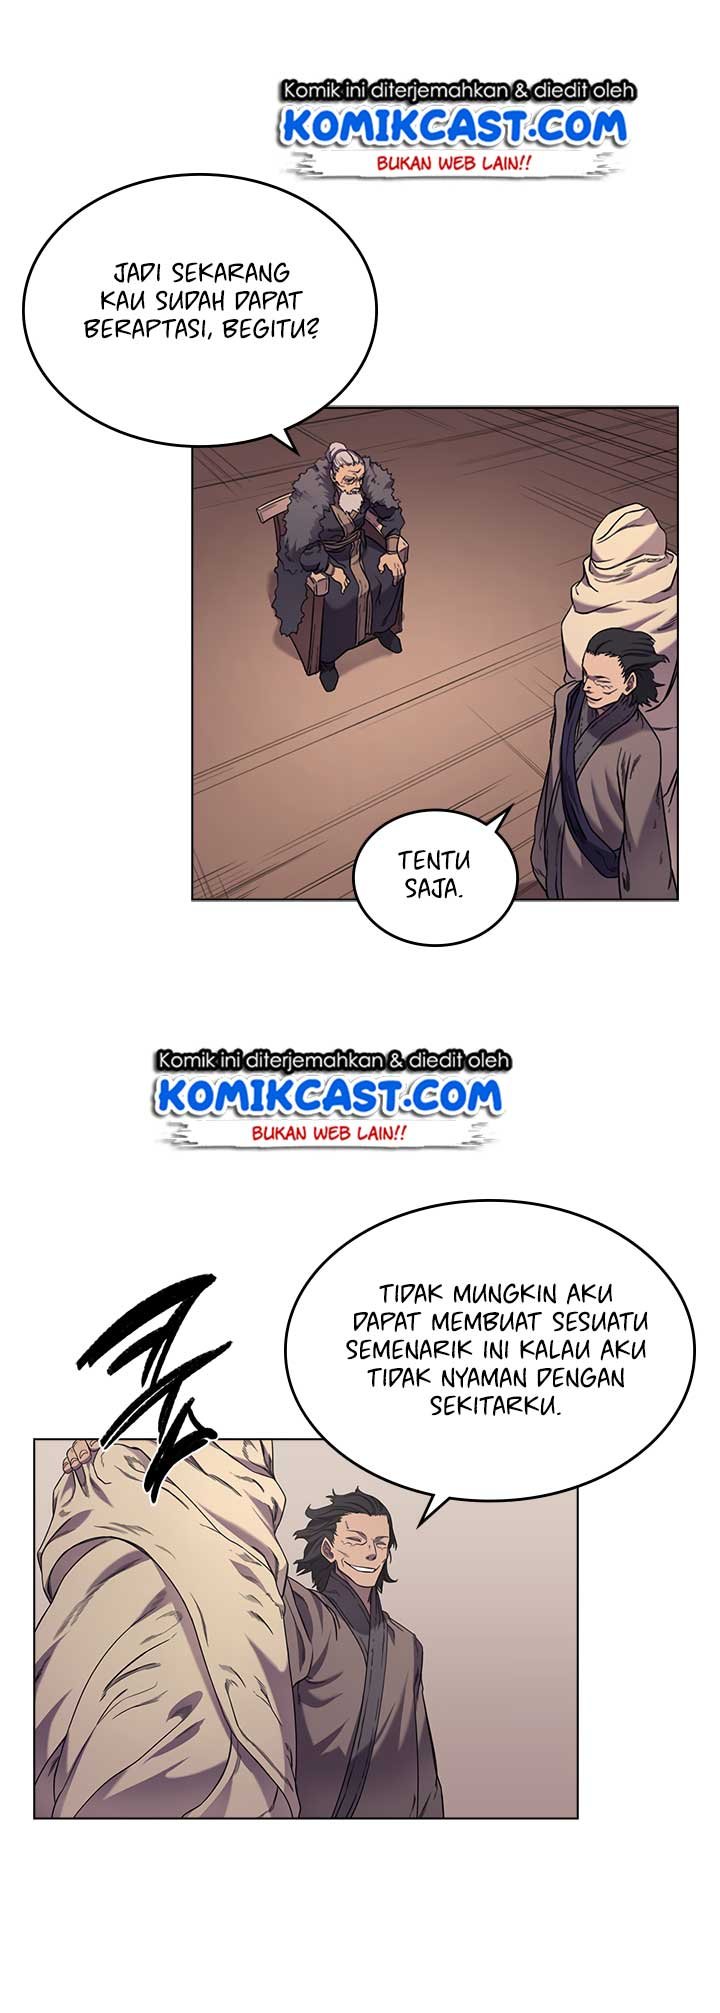 Chronicles of Heavenly Demon Chapter 93